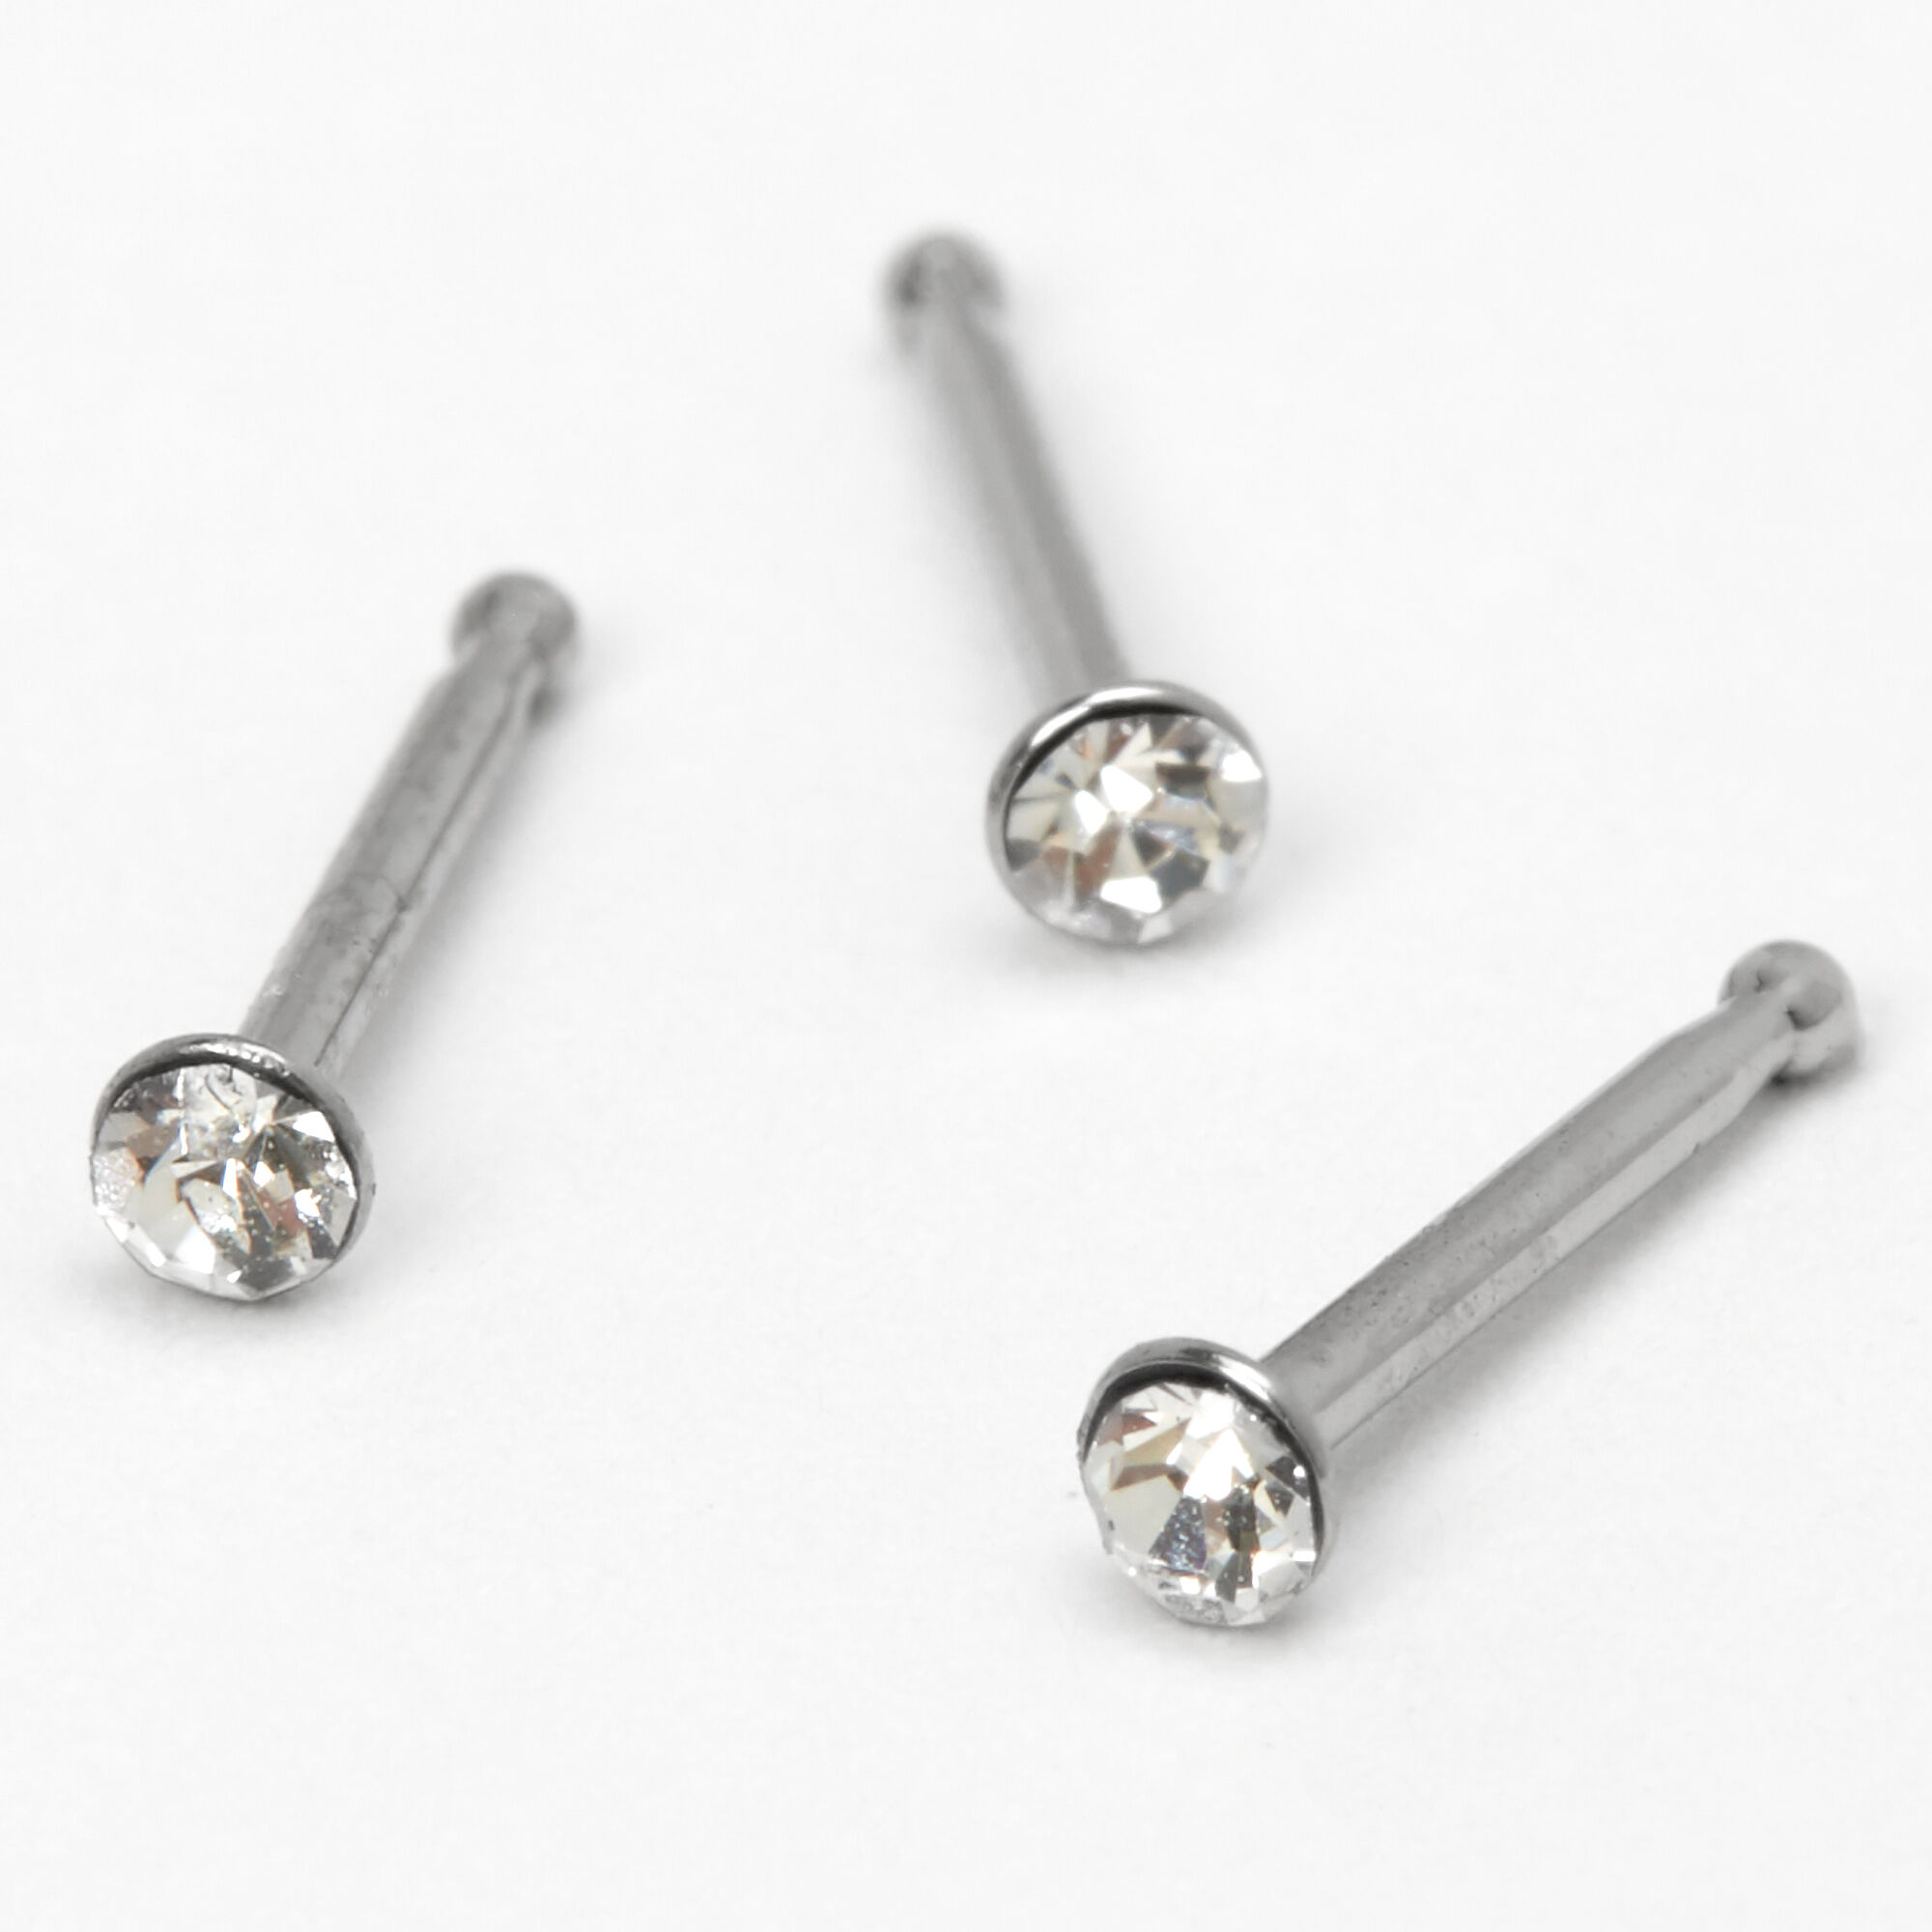 View Claires 20G Crystal Nose Studs 3 Pack Silver information